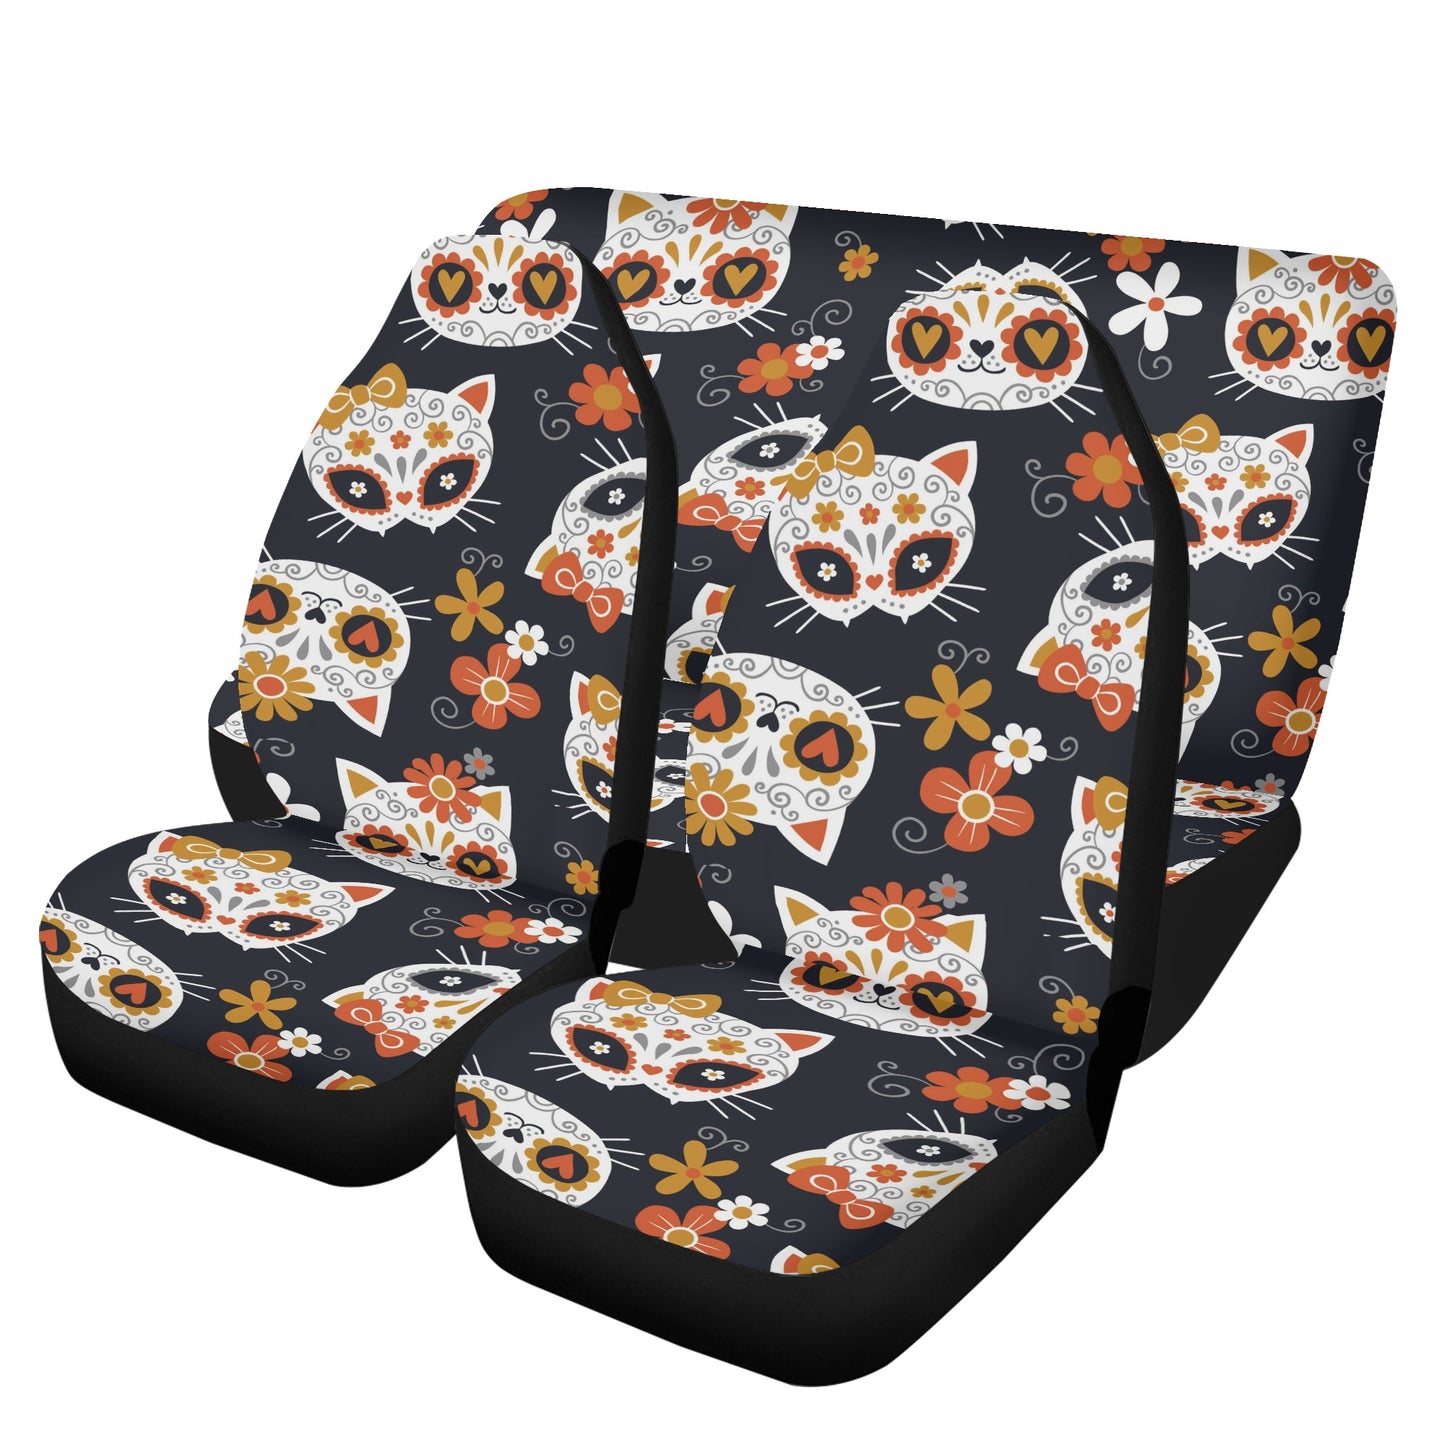 Floral skull seat cover for car, dia de los muertos skull seat cover for vehicles, mexico seat cover protector, day of the dead seat cover f